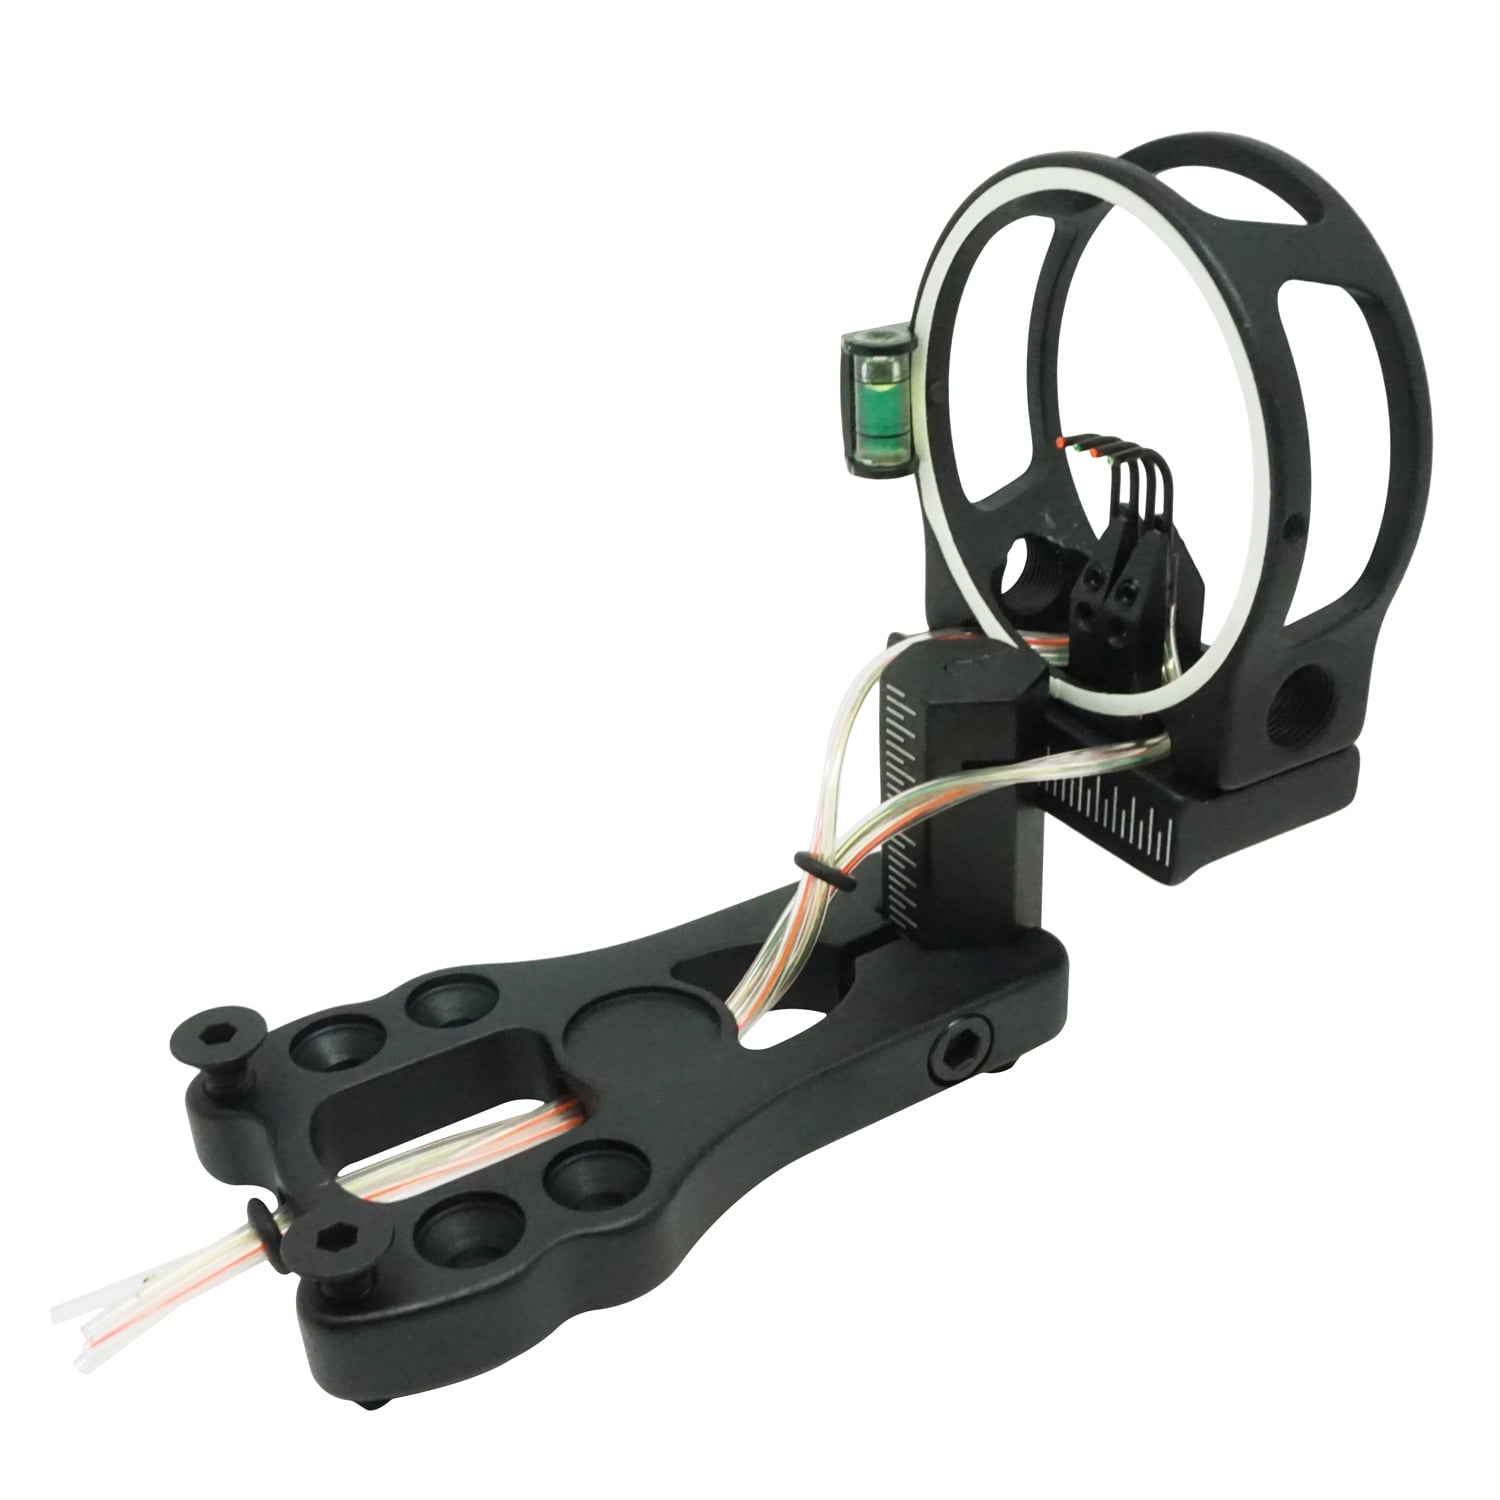 Fiber Optic 5 Pin Archery Bow Sight w/LED Light Hunting For compound Bow 